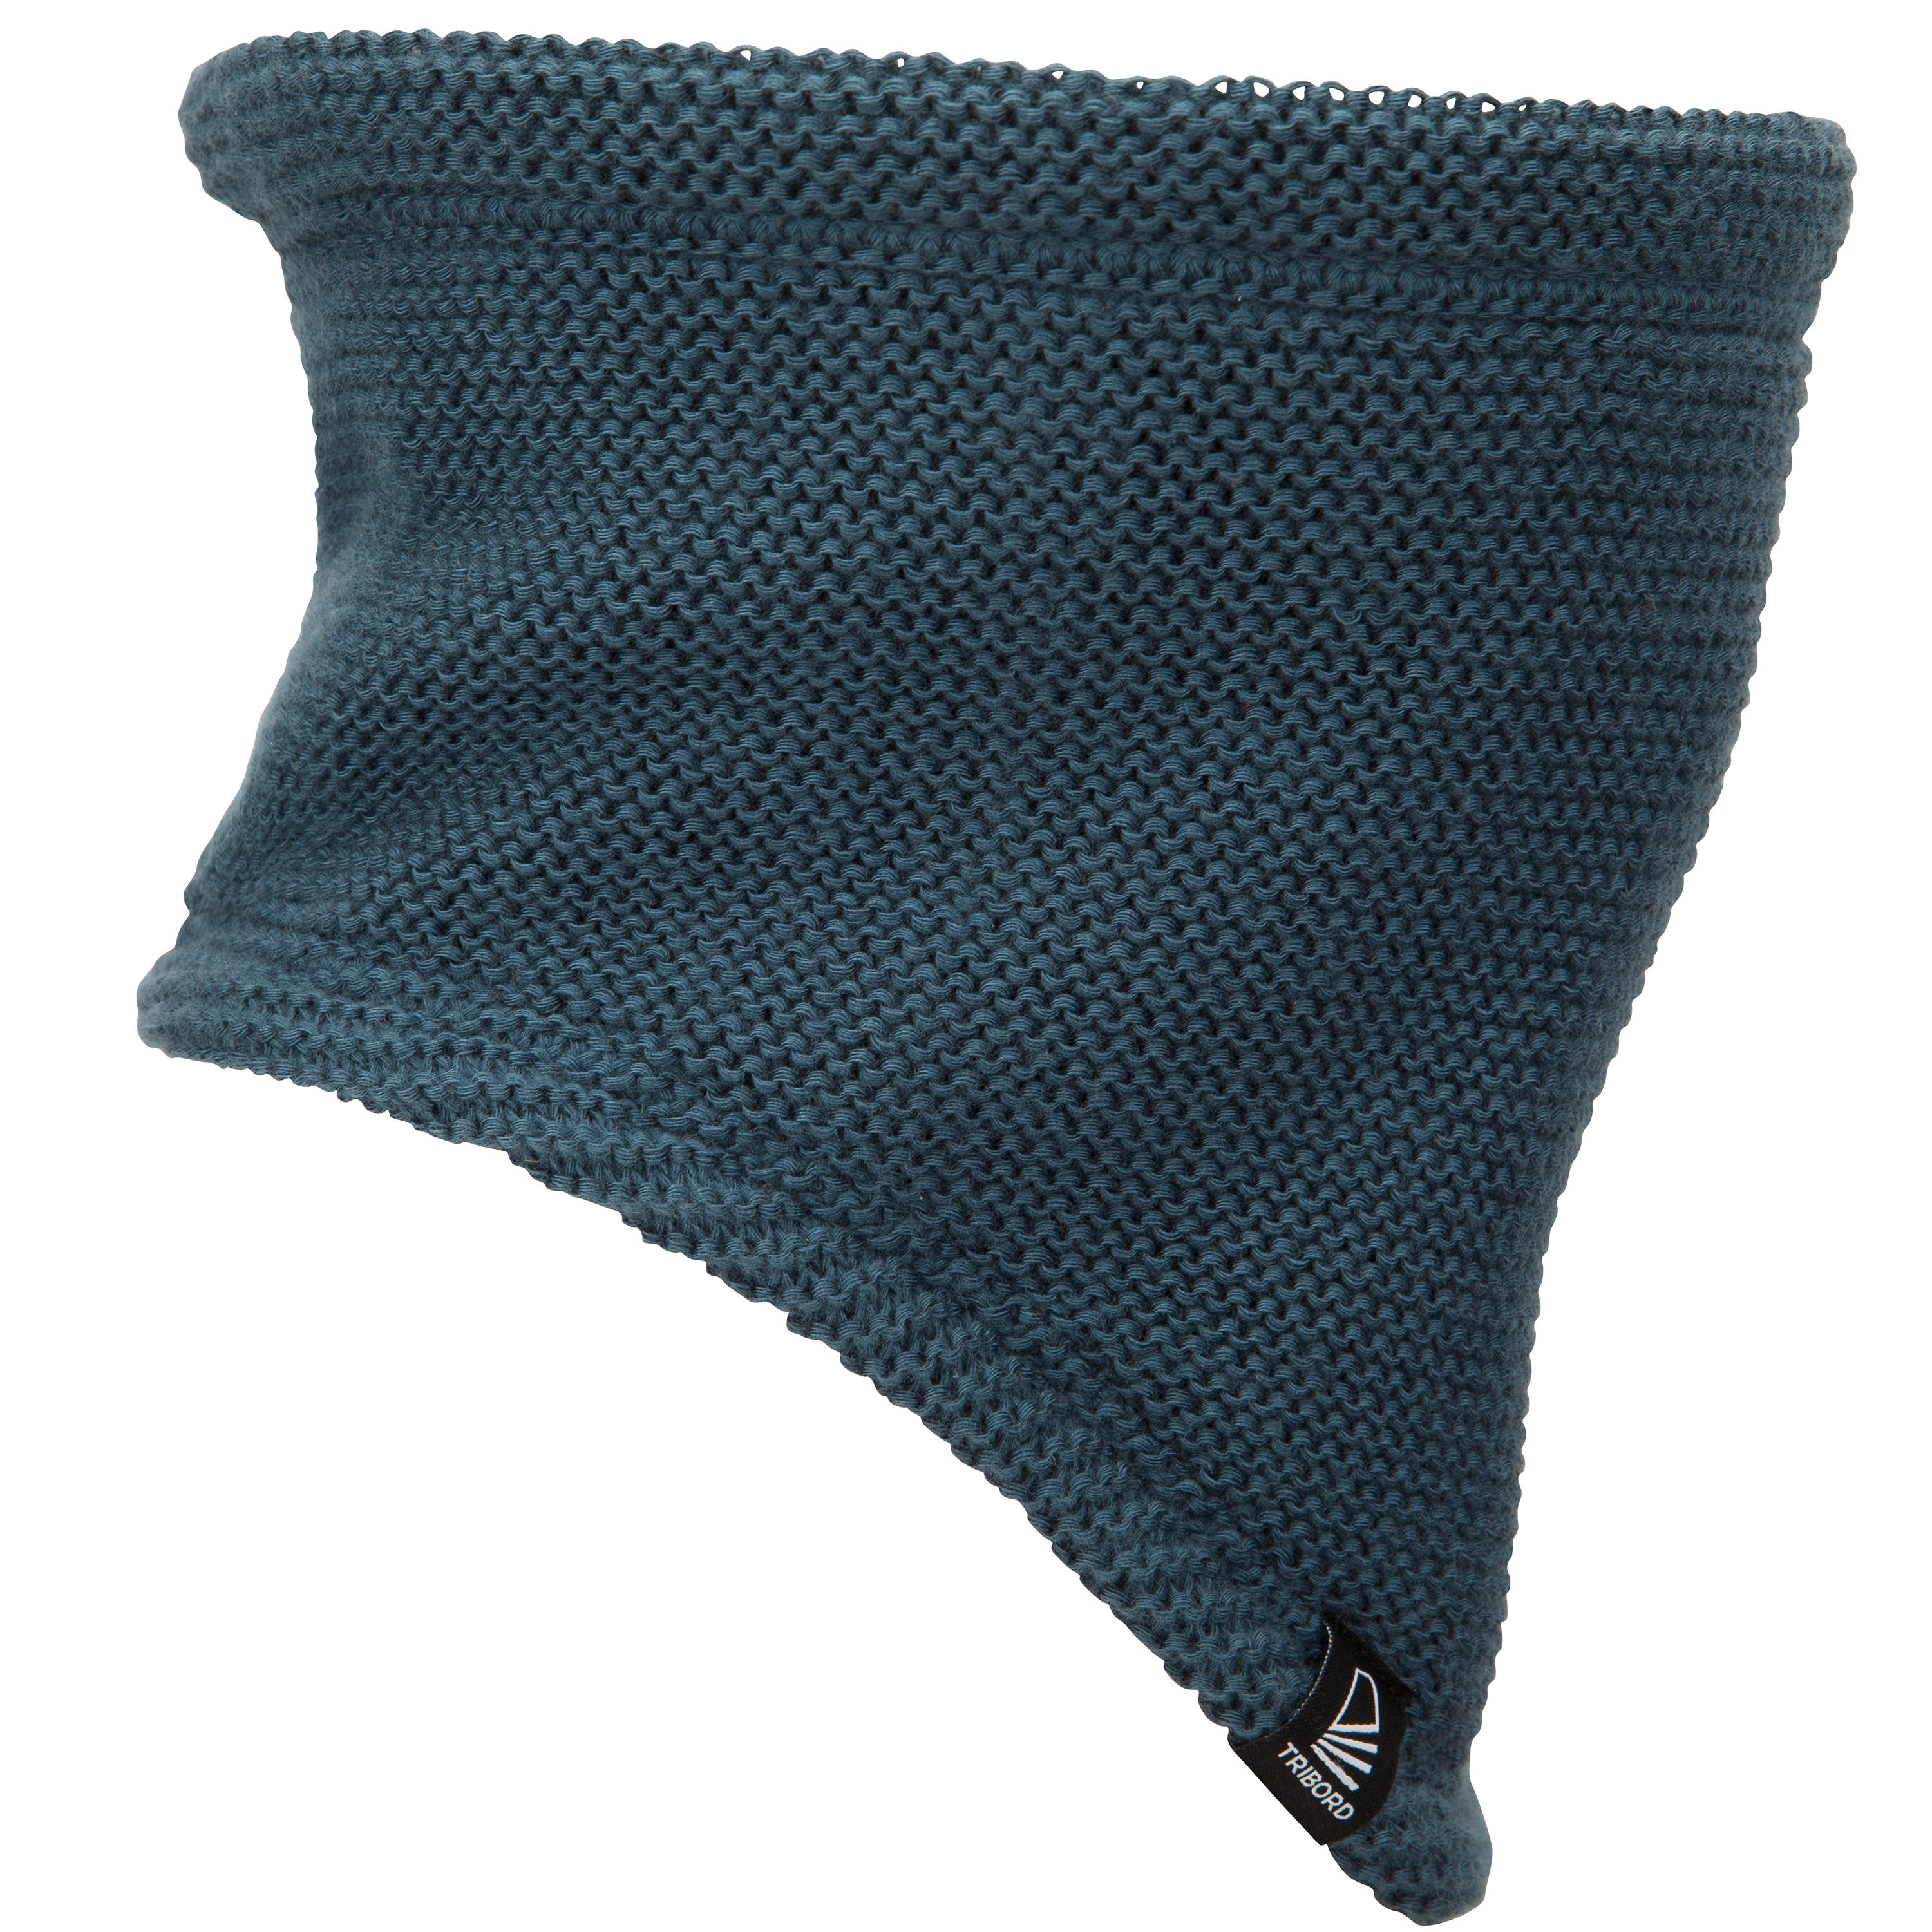 Adult's windproof neck warmer SAILING 100 - Grey 2/6